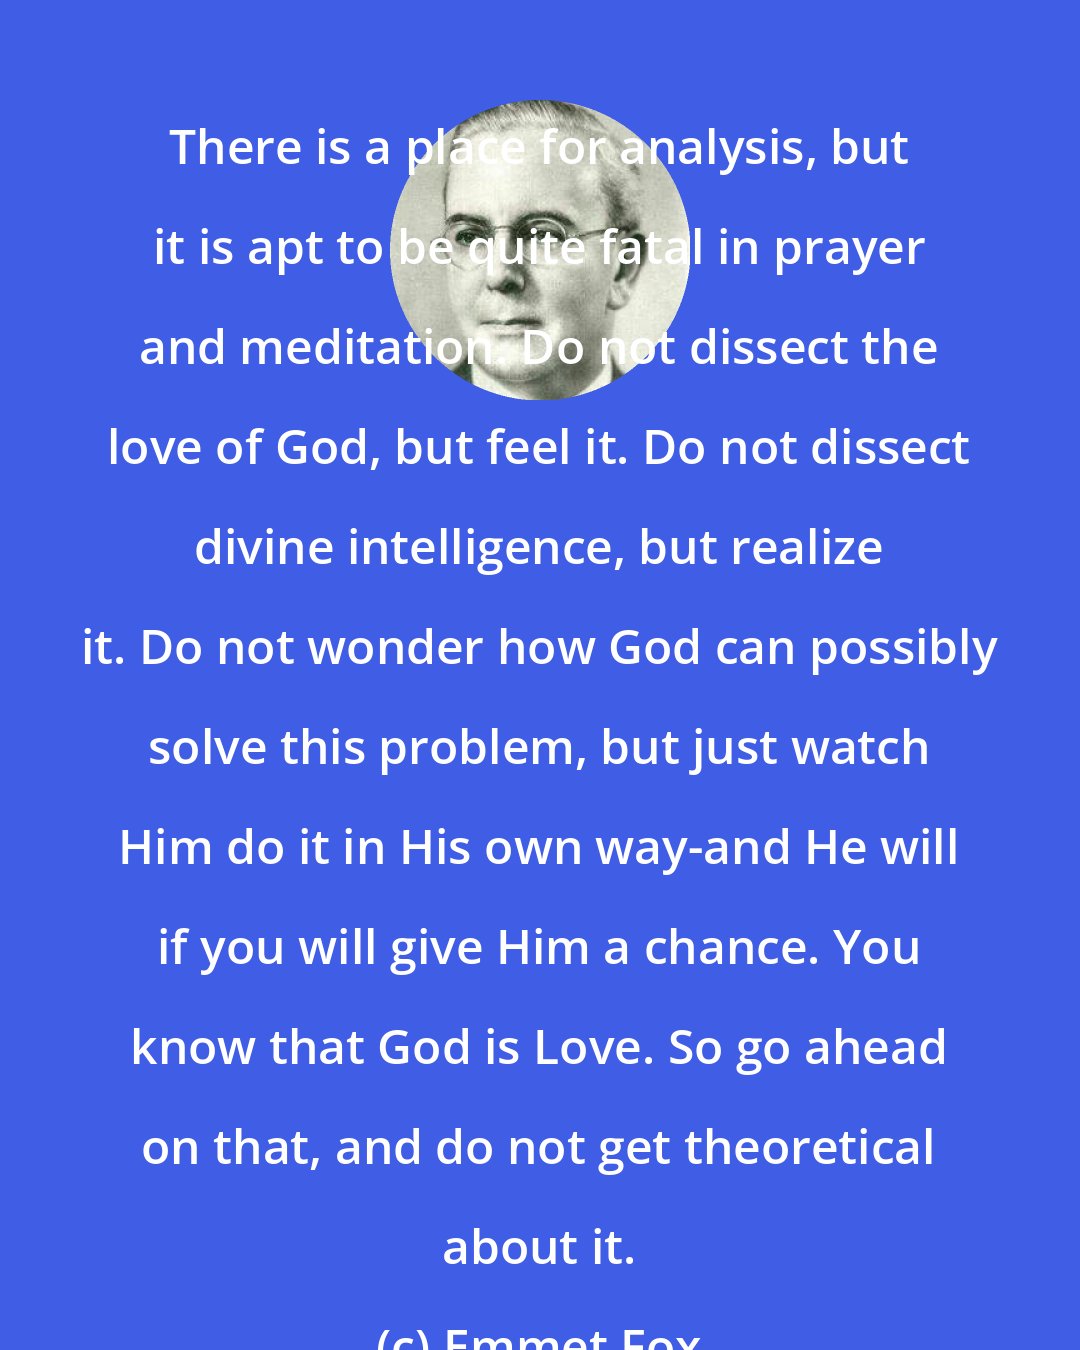 Emmet Fox: There is a place for analysis, but it is apt to be quite fatal in prayer and meditation. Do not dissect the love of God, but feel it. Do not dissect divine intelligence, but realize it. Do not wonder how God can possibly solve this problem, but just watch Him do it in His own way-and He will if you will give Him a chance. You know that God is Love. So go ahead on that, and do not get theoretical about it.